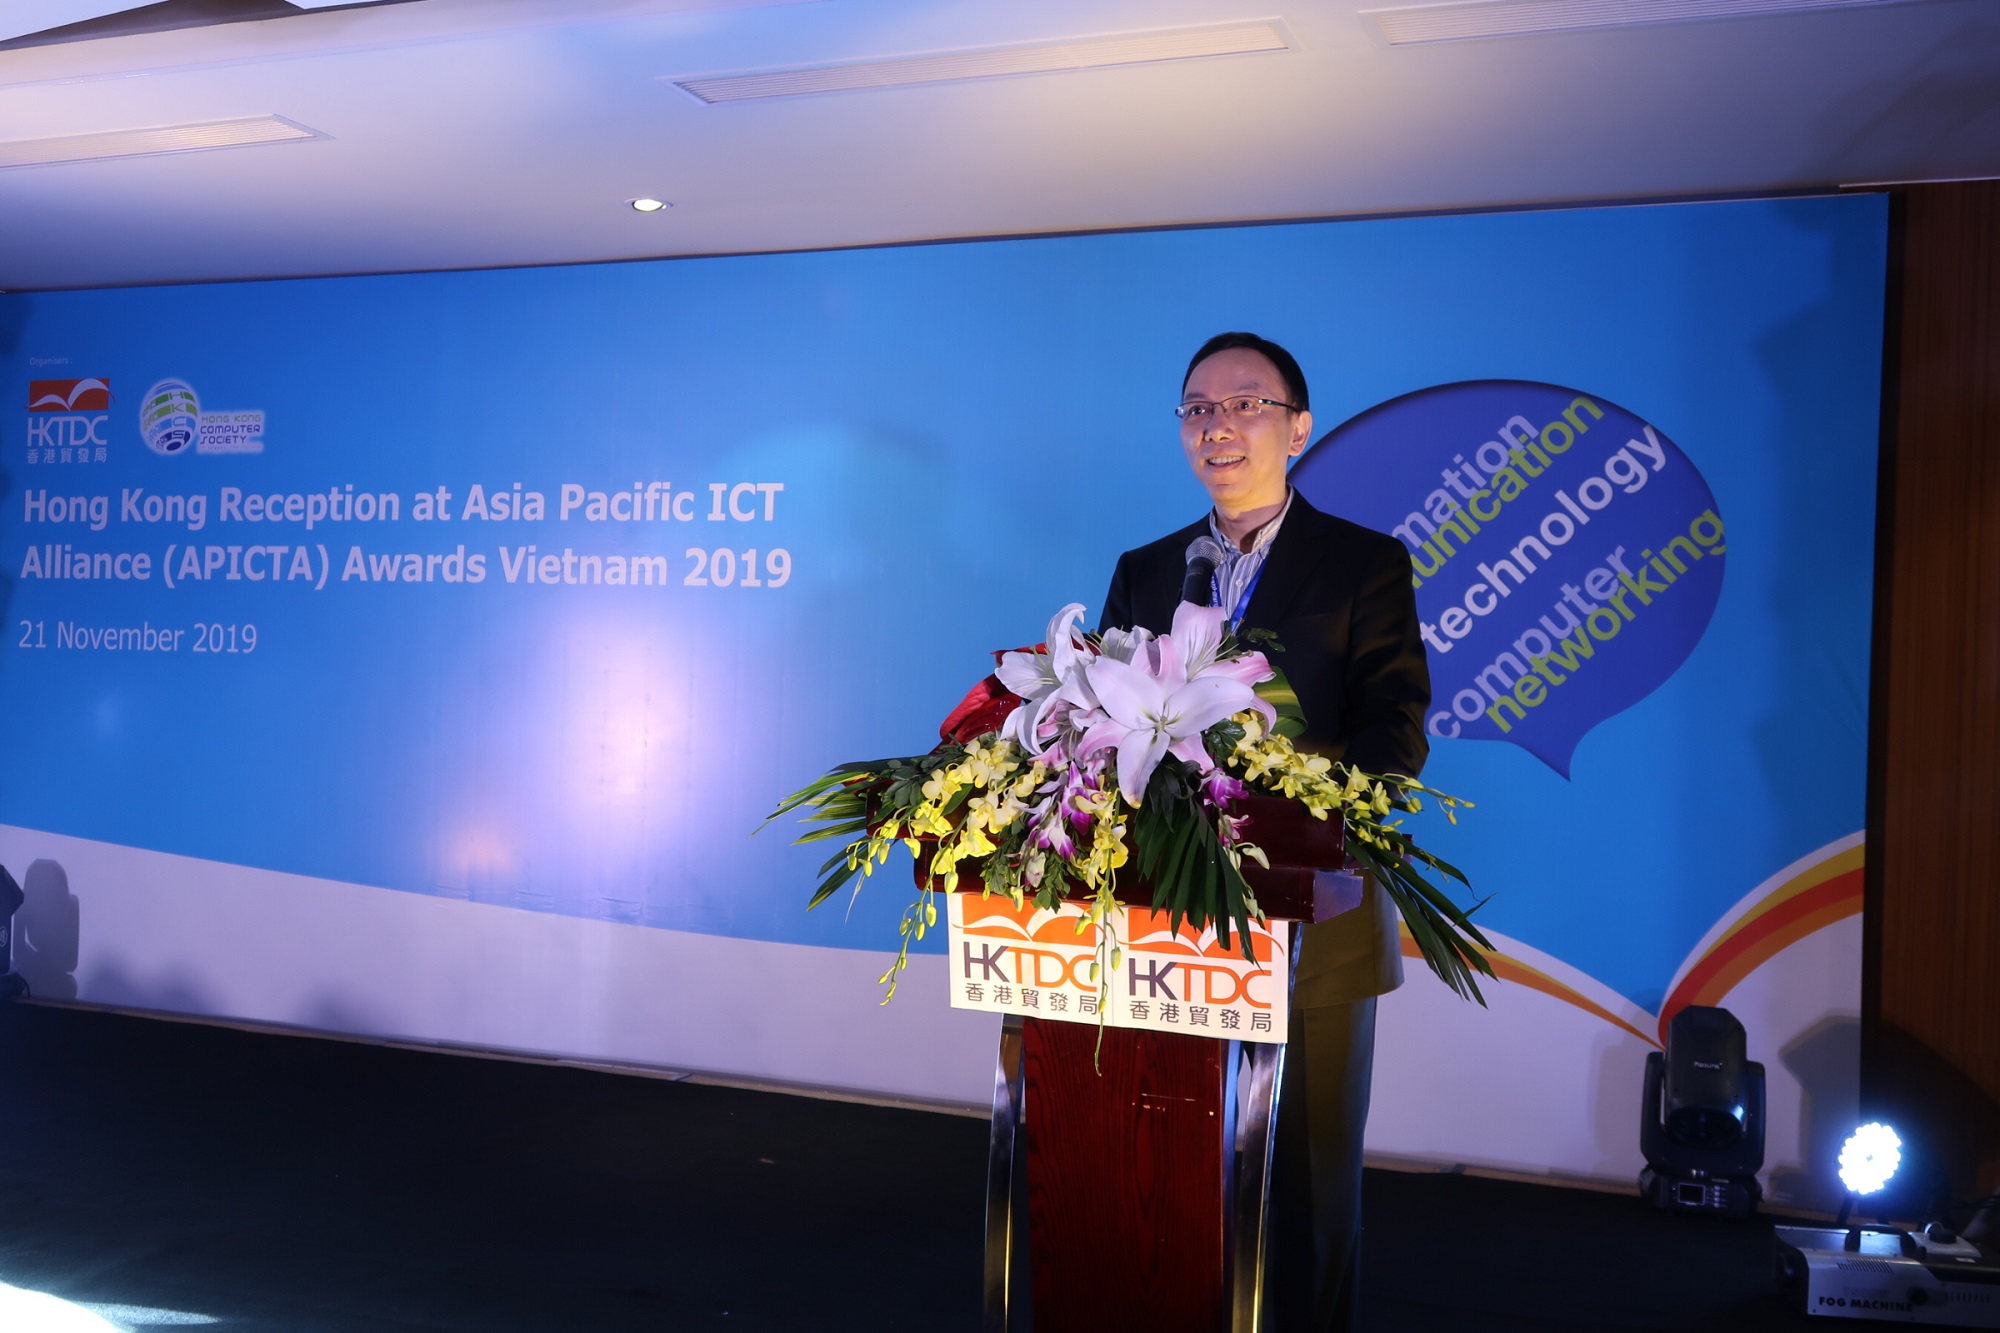 Mr. Victor Lam, Government Chief Information Officer, delivers Opening Speech at the “Hong Kong Reception at Asia Pacific ICT Alliance (APICTA) Awards Vietnam 2019”.